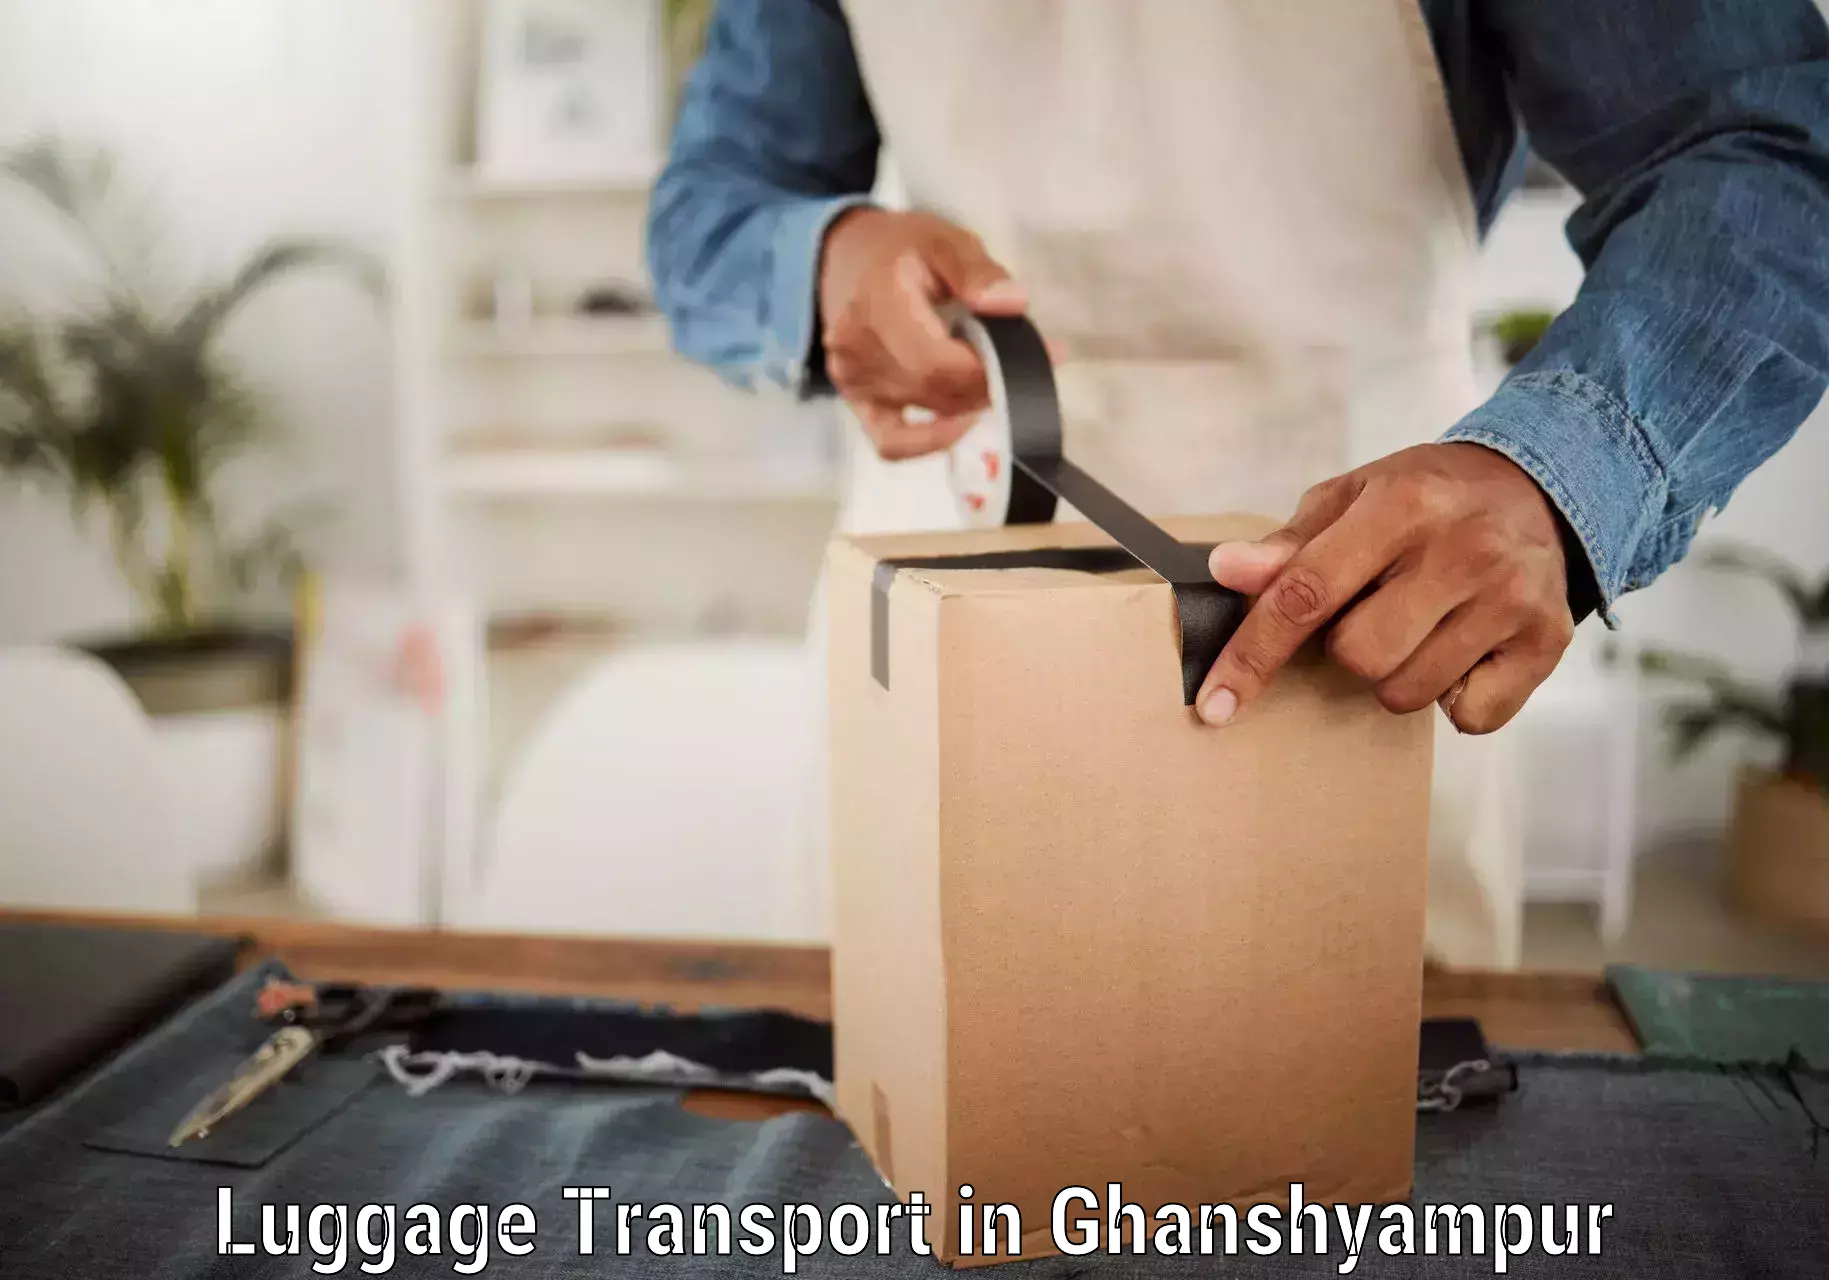 Baggage transport quote in Ghanshyampur